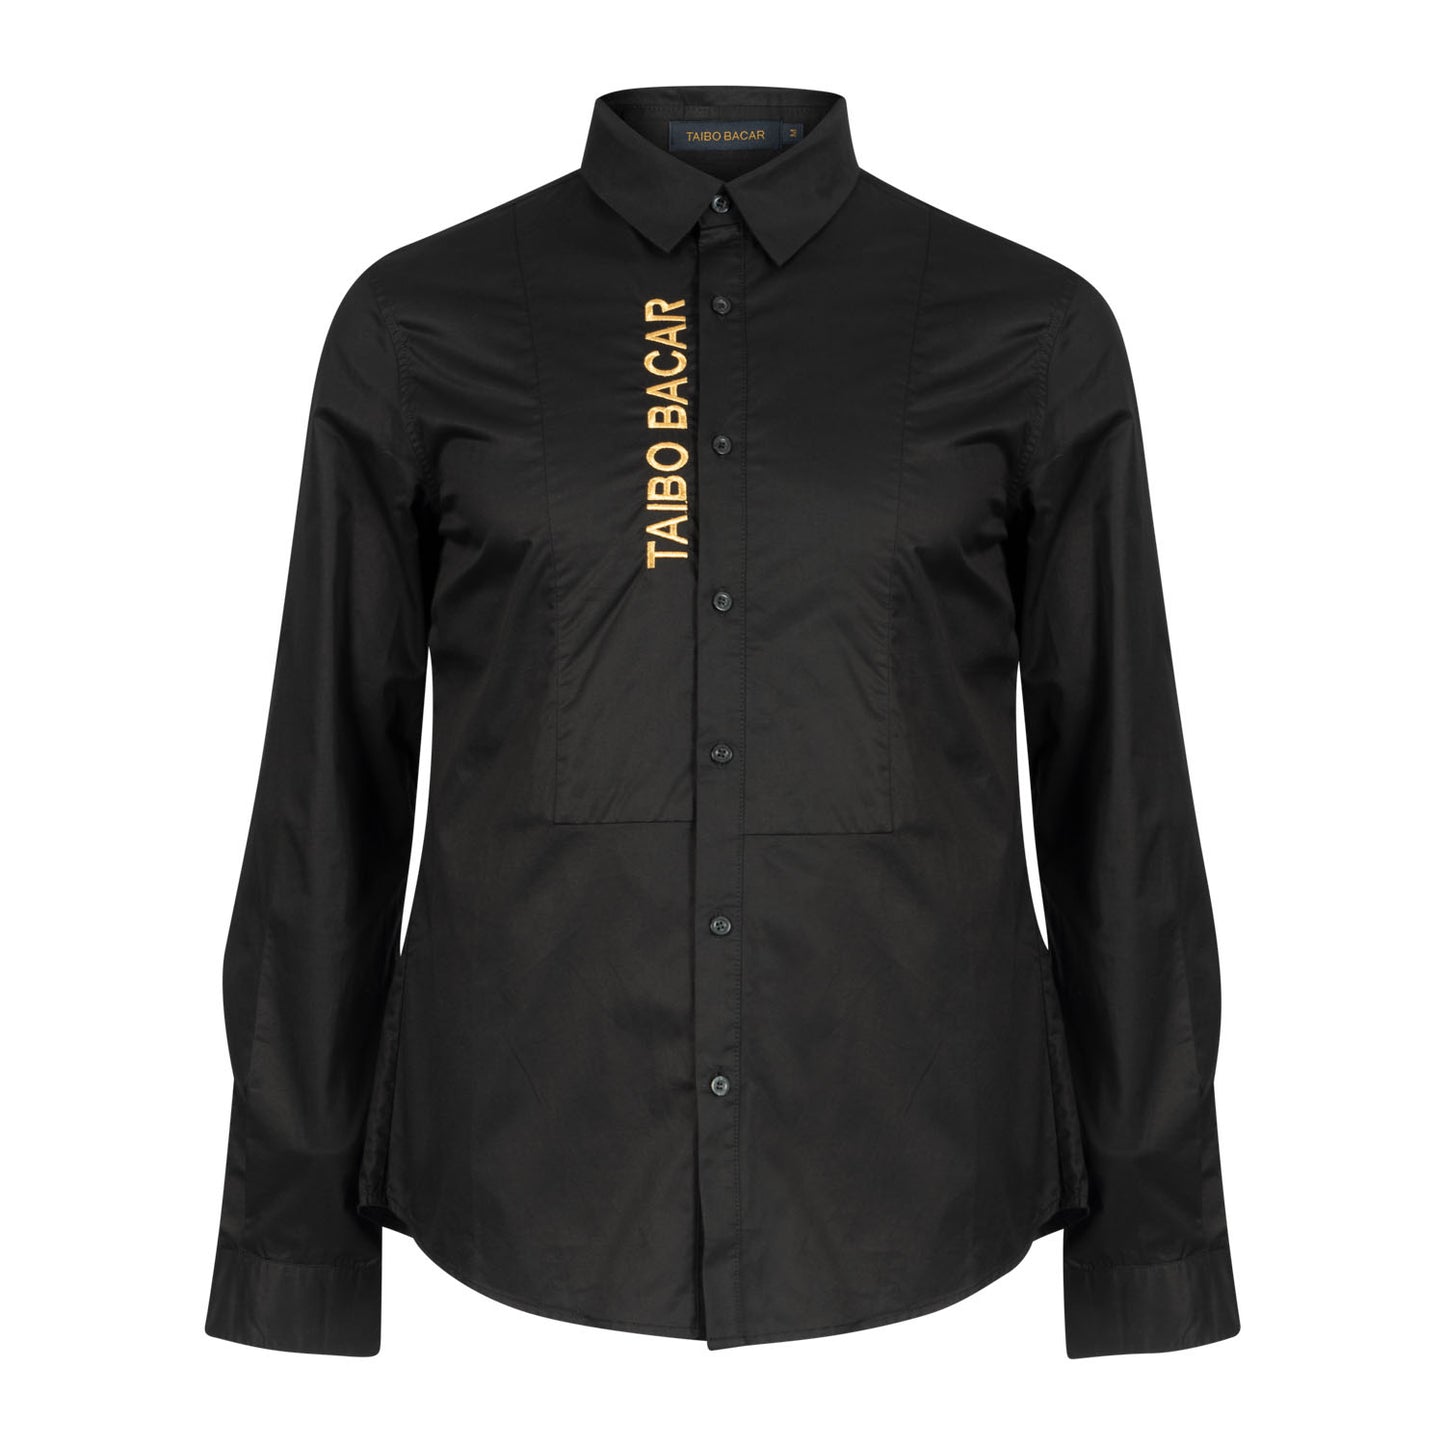 Branded Embroidery Button Up Shirt